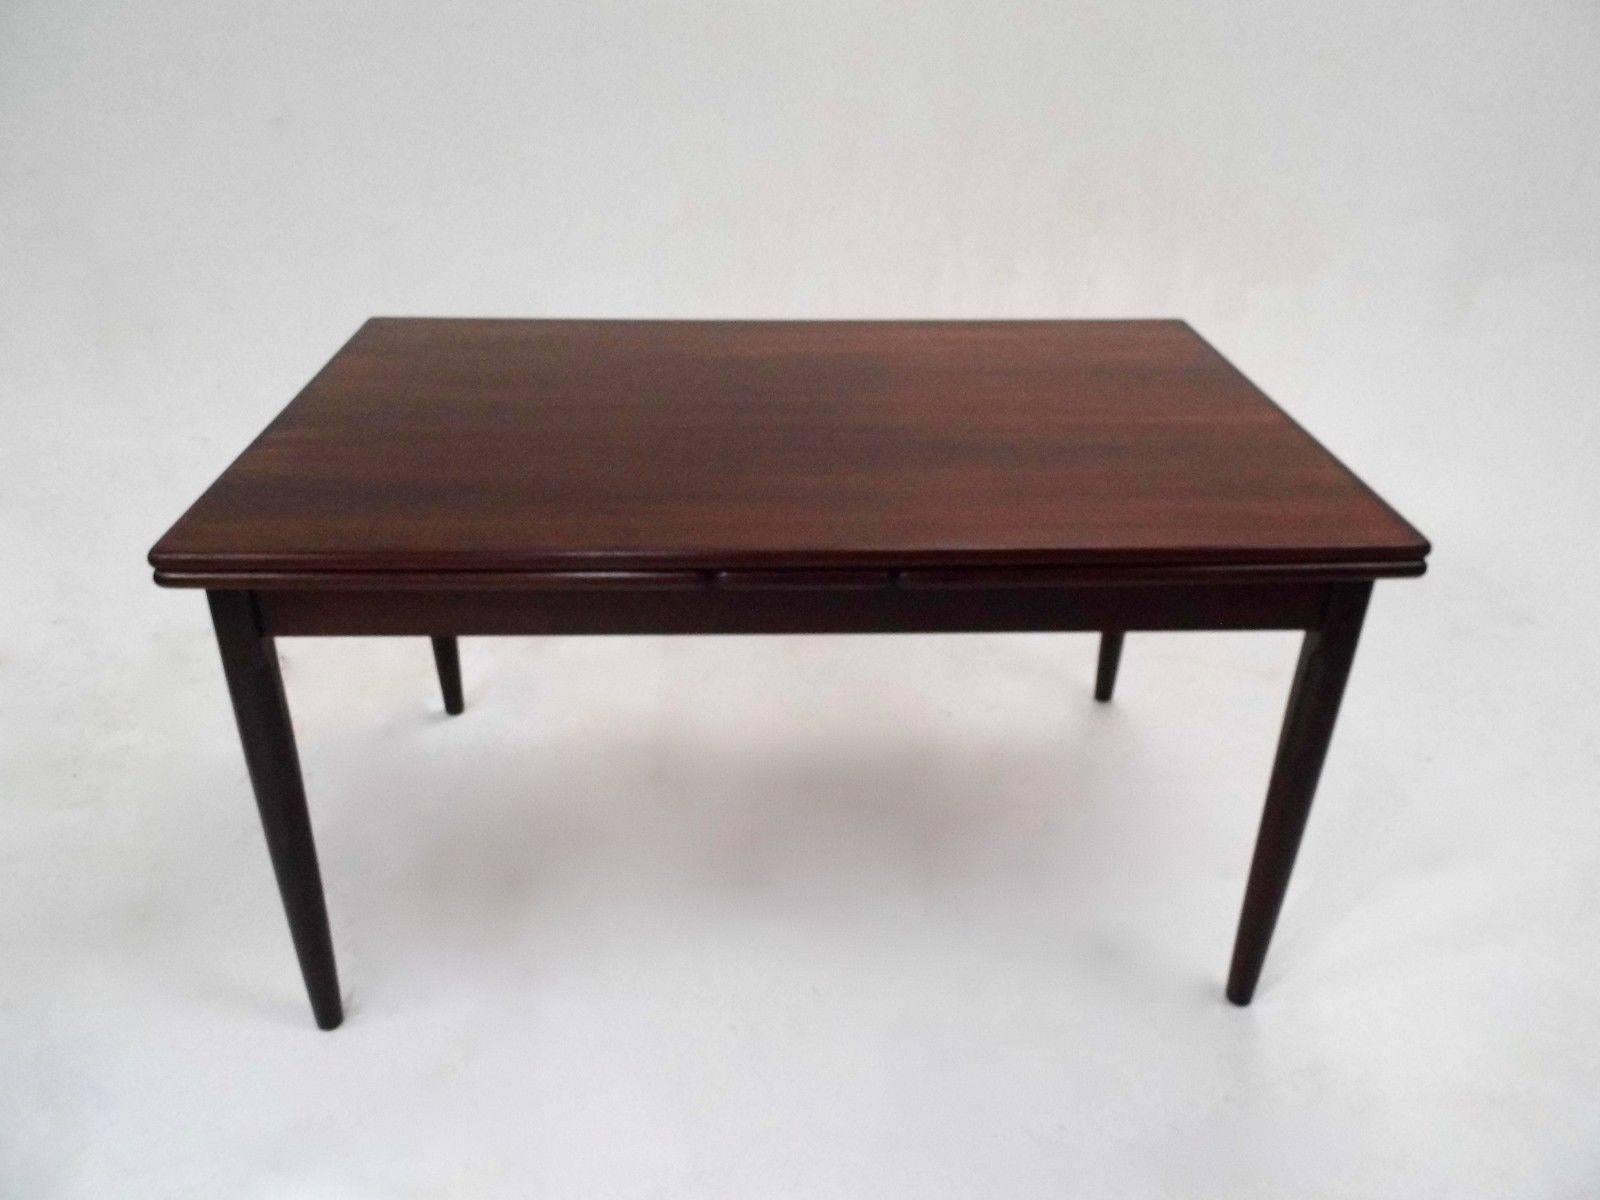 A beautiful Danish large rosewood extending dining table, this would make a stylish addition to any dining area. The table has two extension panels which fit discreetly below the top panel and can be pulled out when needed. A striking piece of